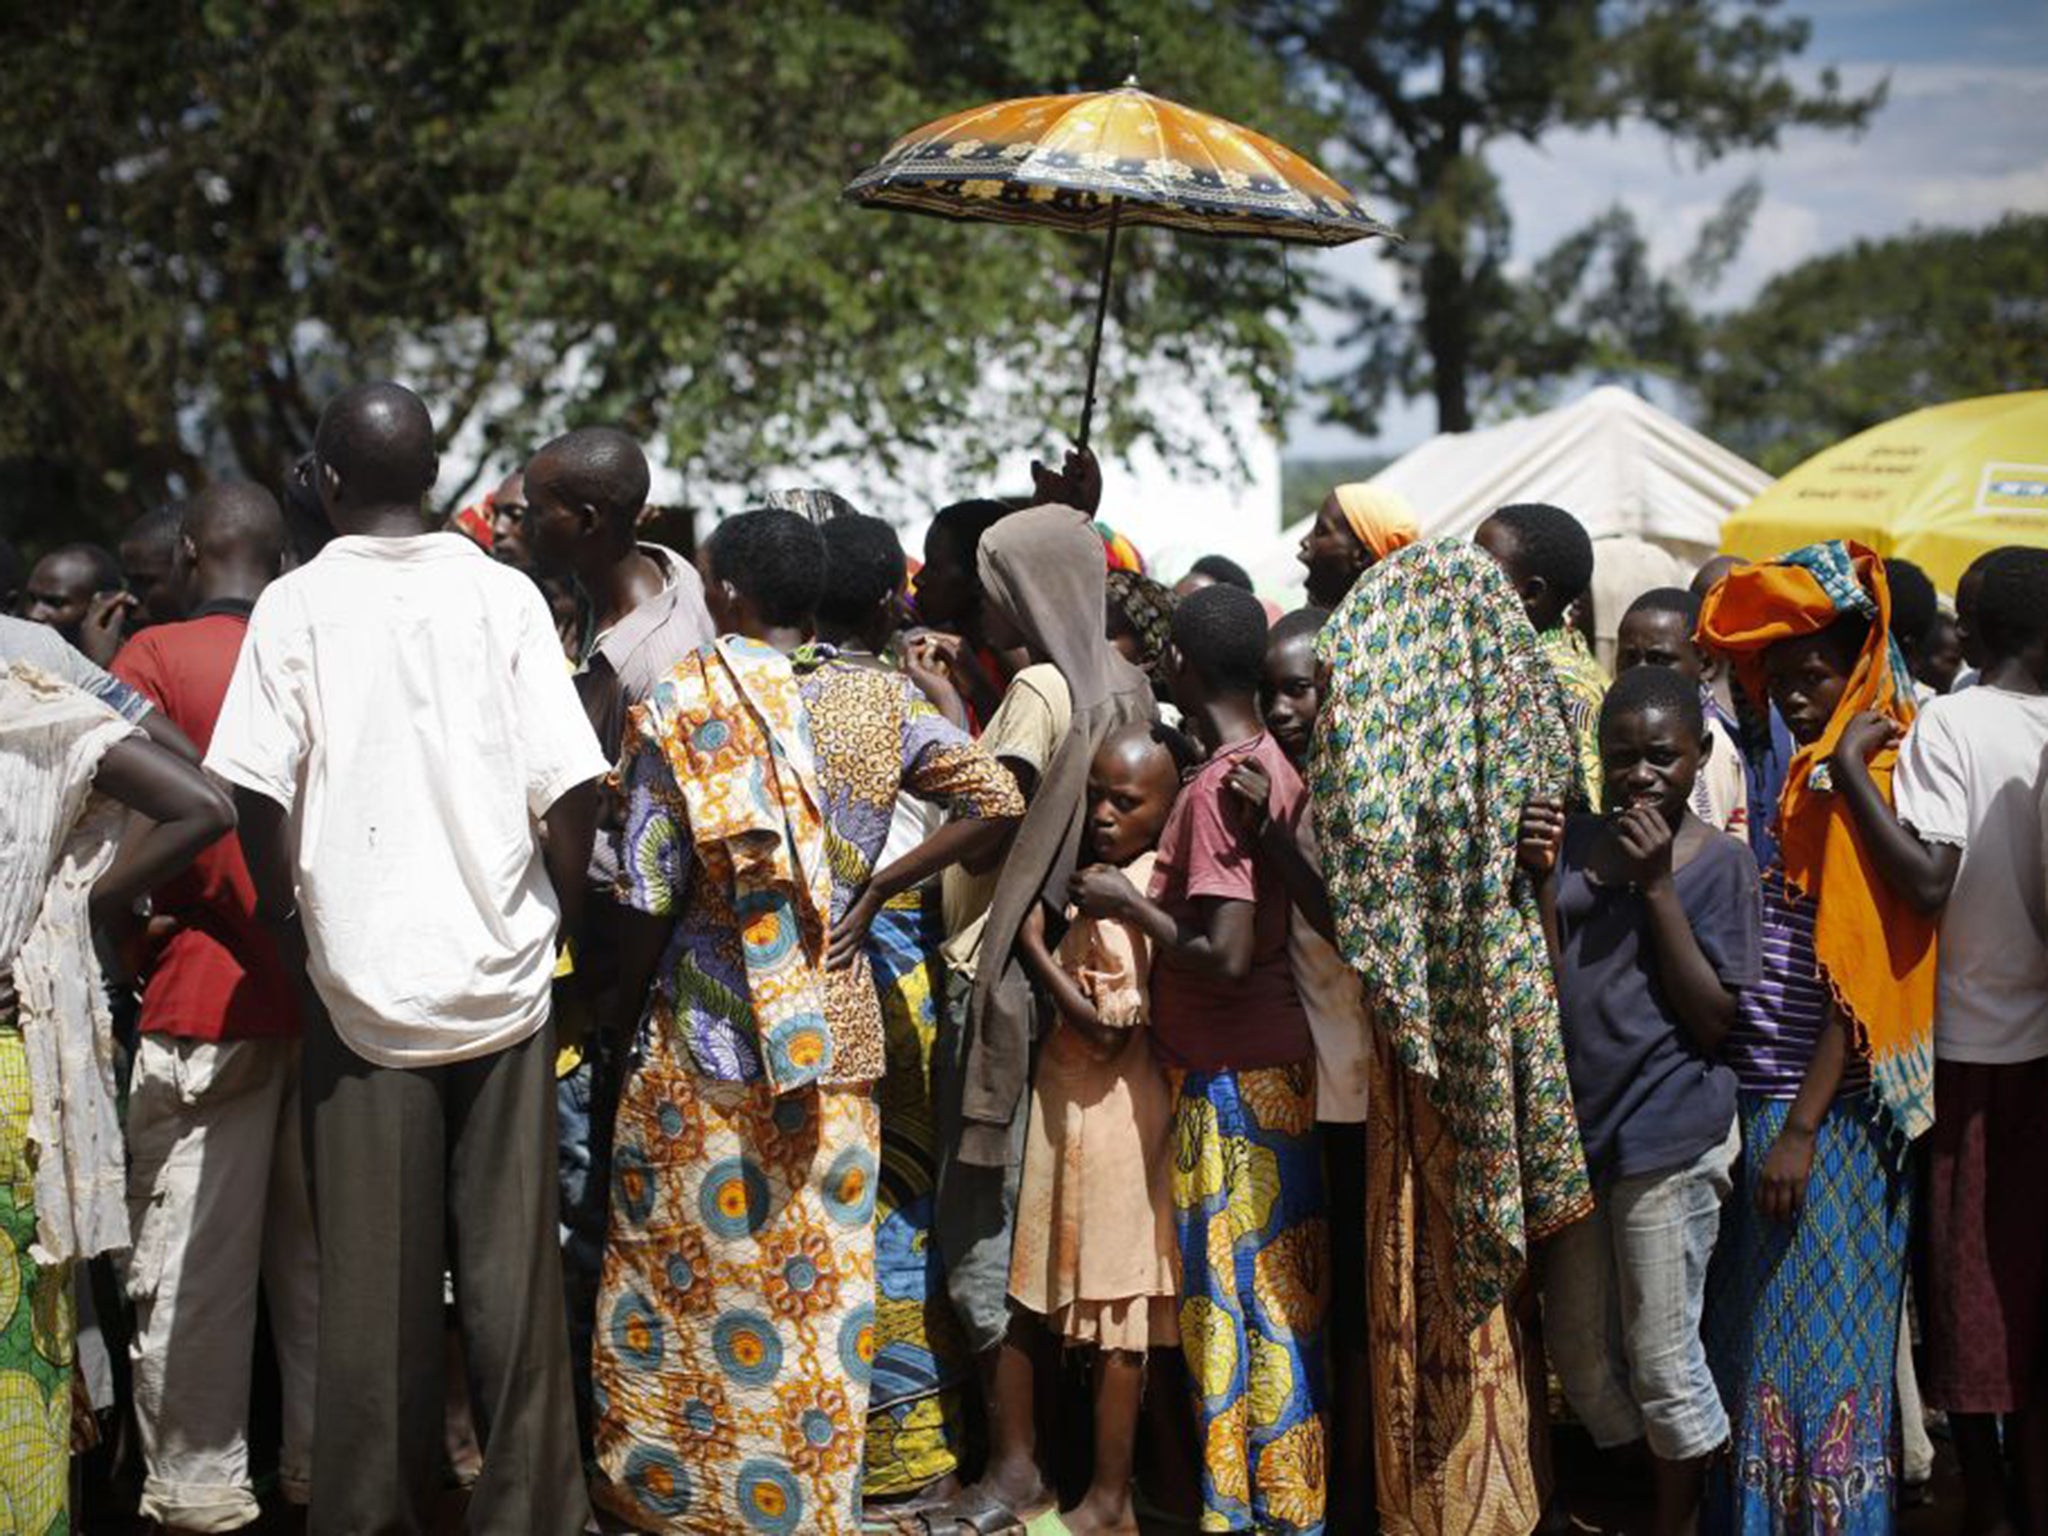 Burundian refugees queue to receive handout clothes in a refugee camp in Gashora, south of the capital Kigali